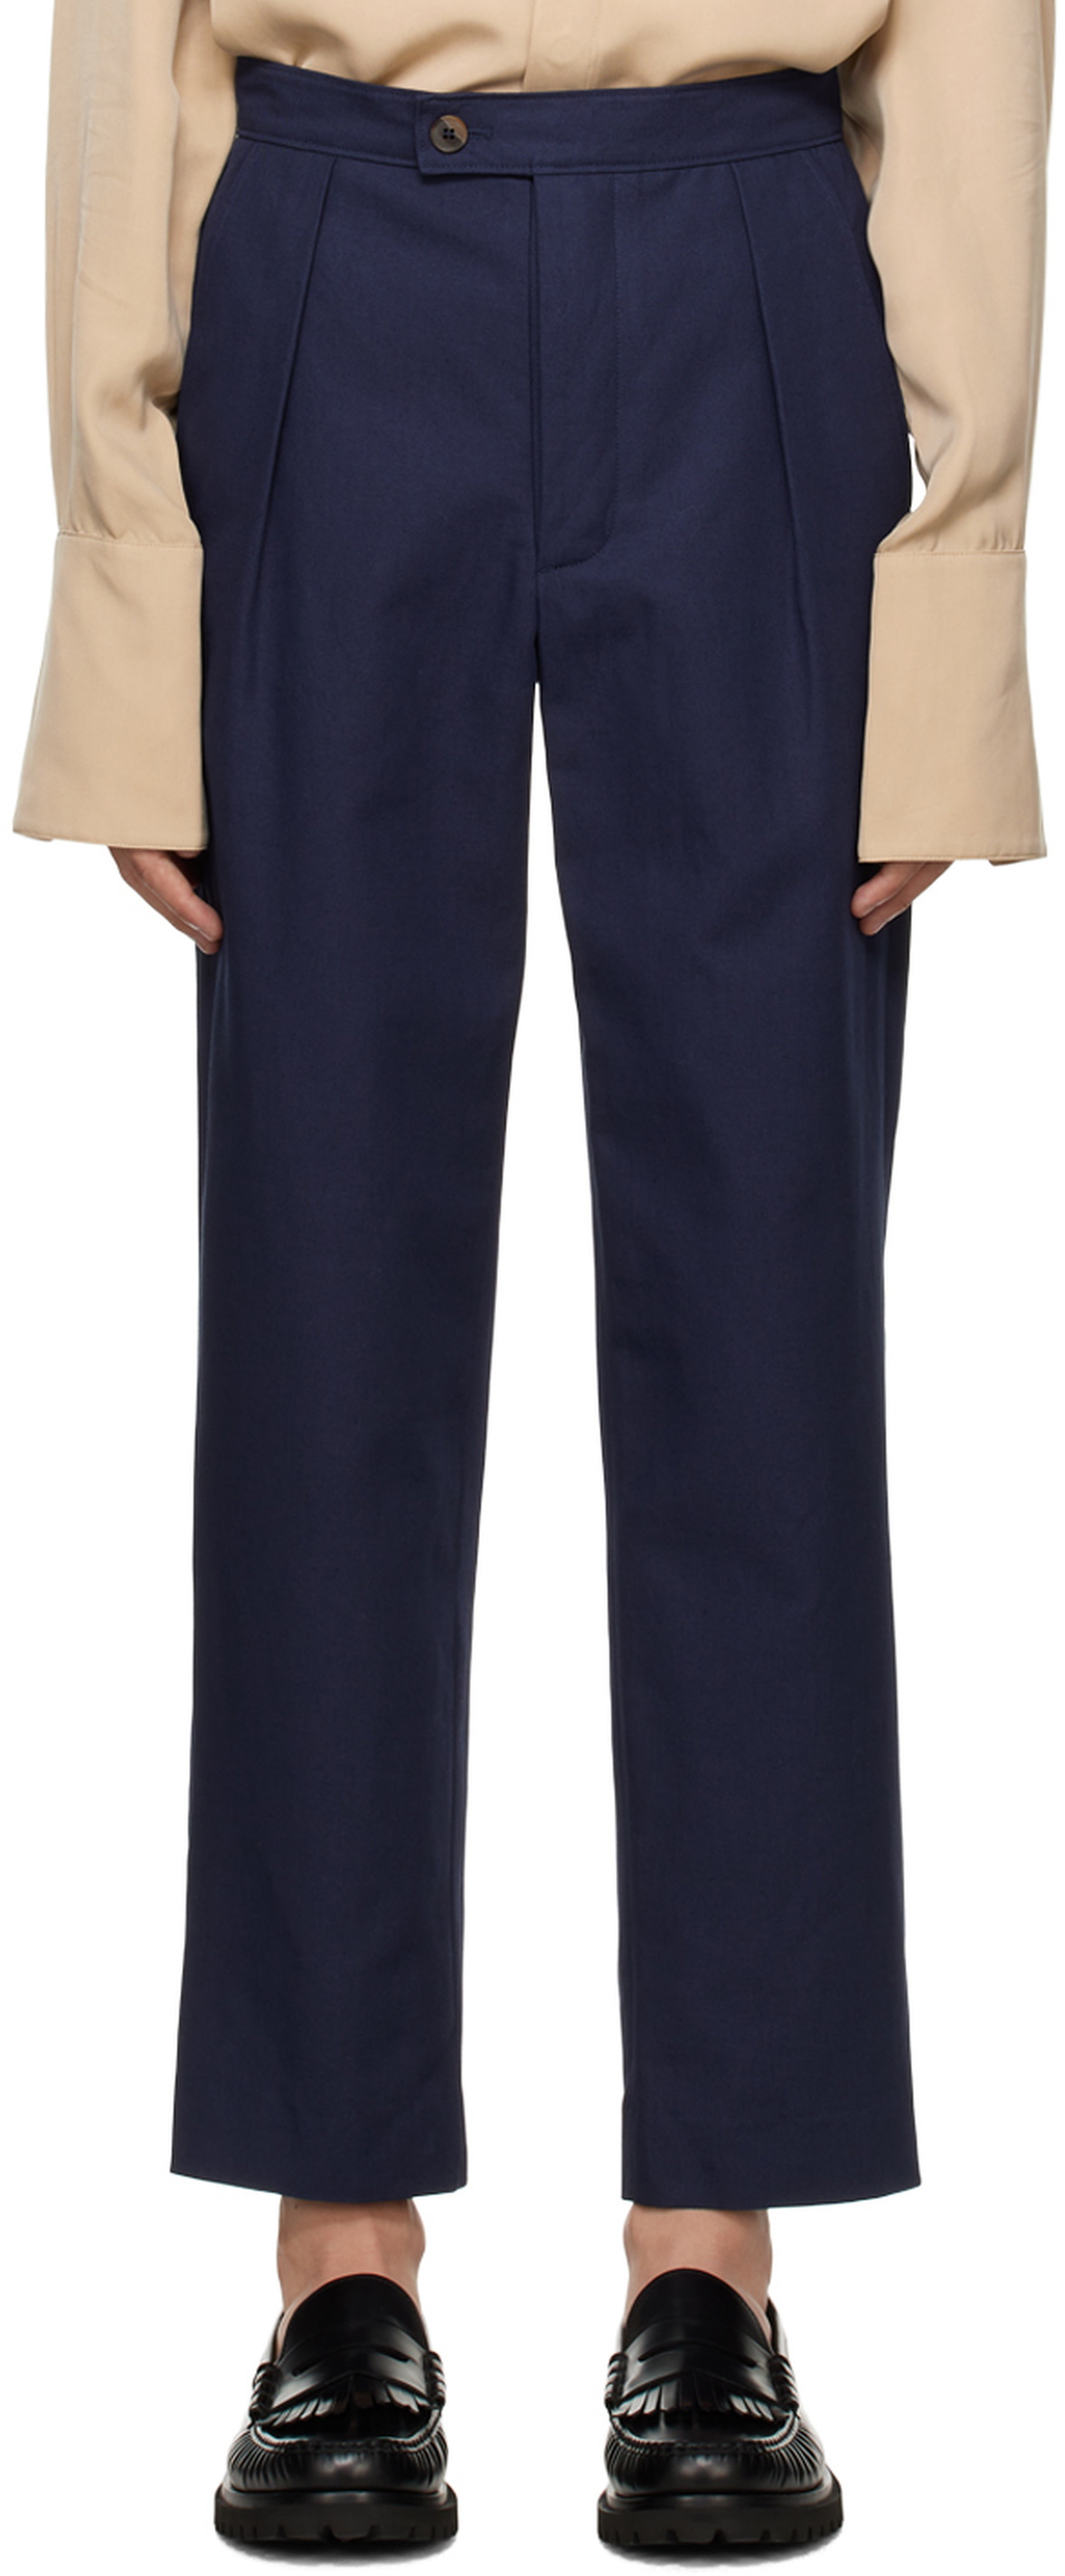 King & Tuckfield Navy Pleated Trousers